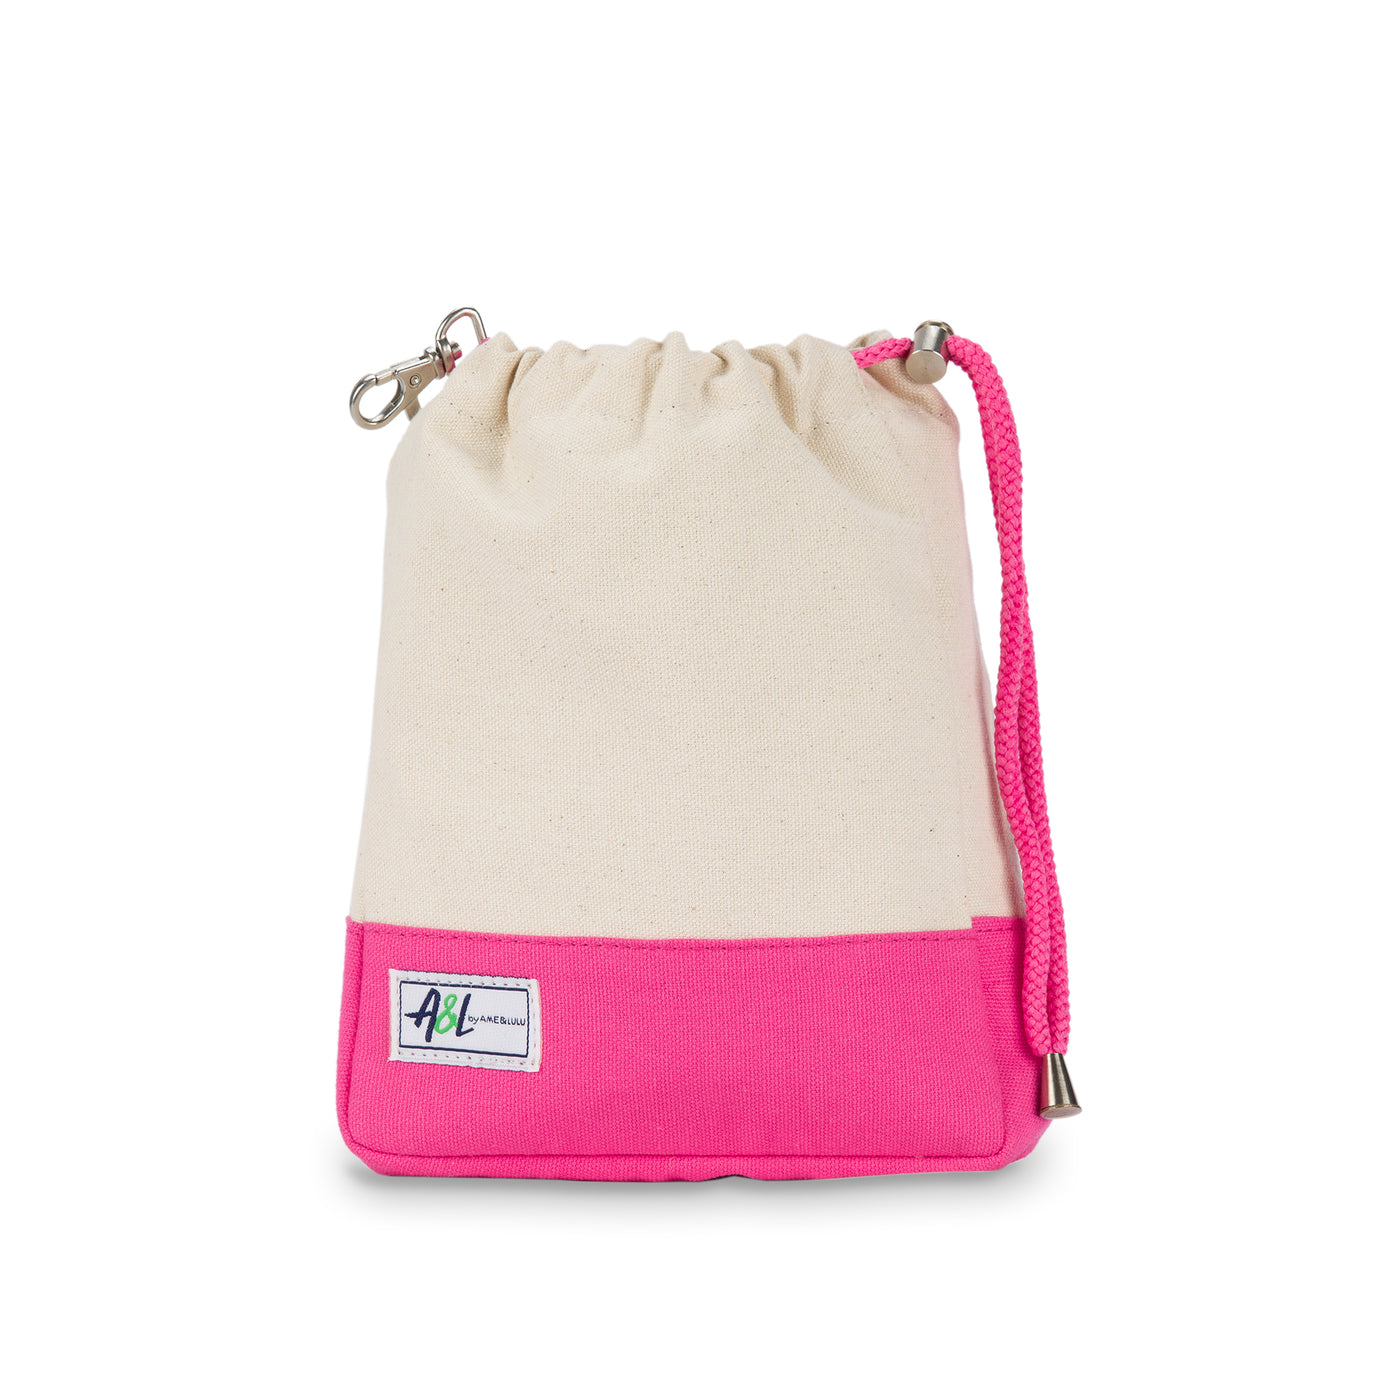 tan canvas small drawstring pouch with hot pink trim.